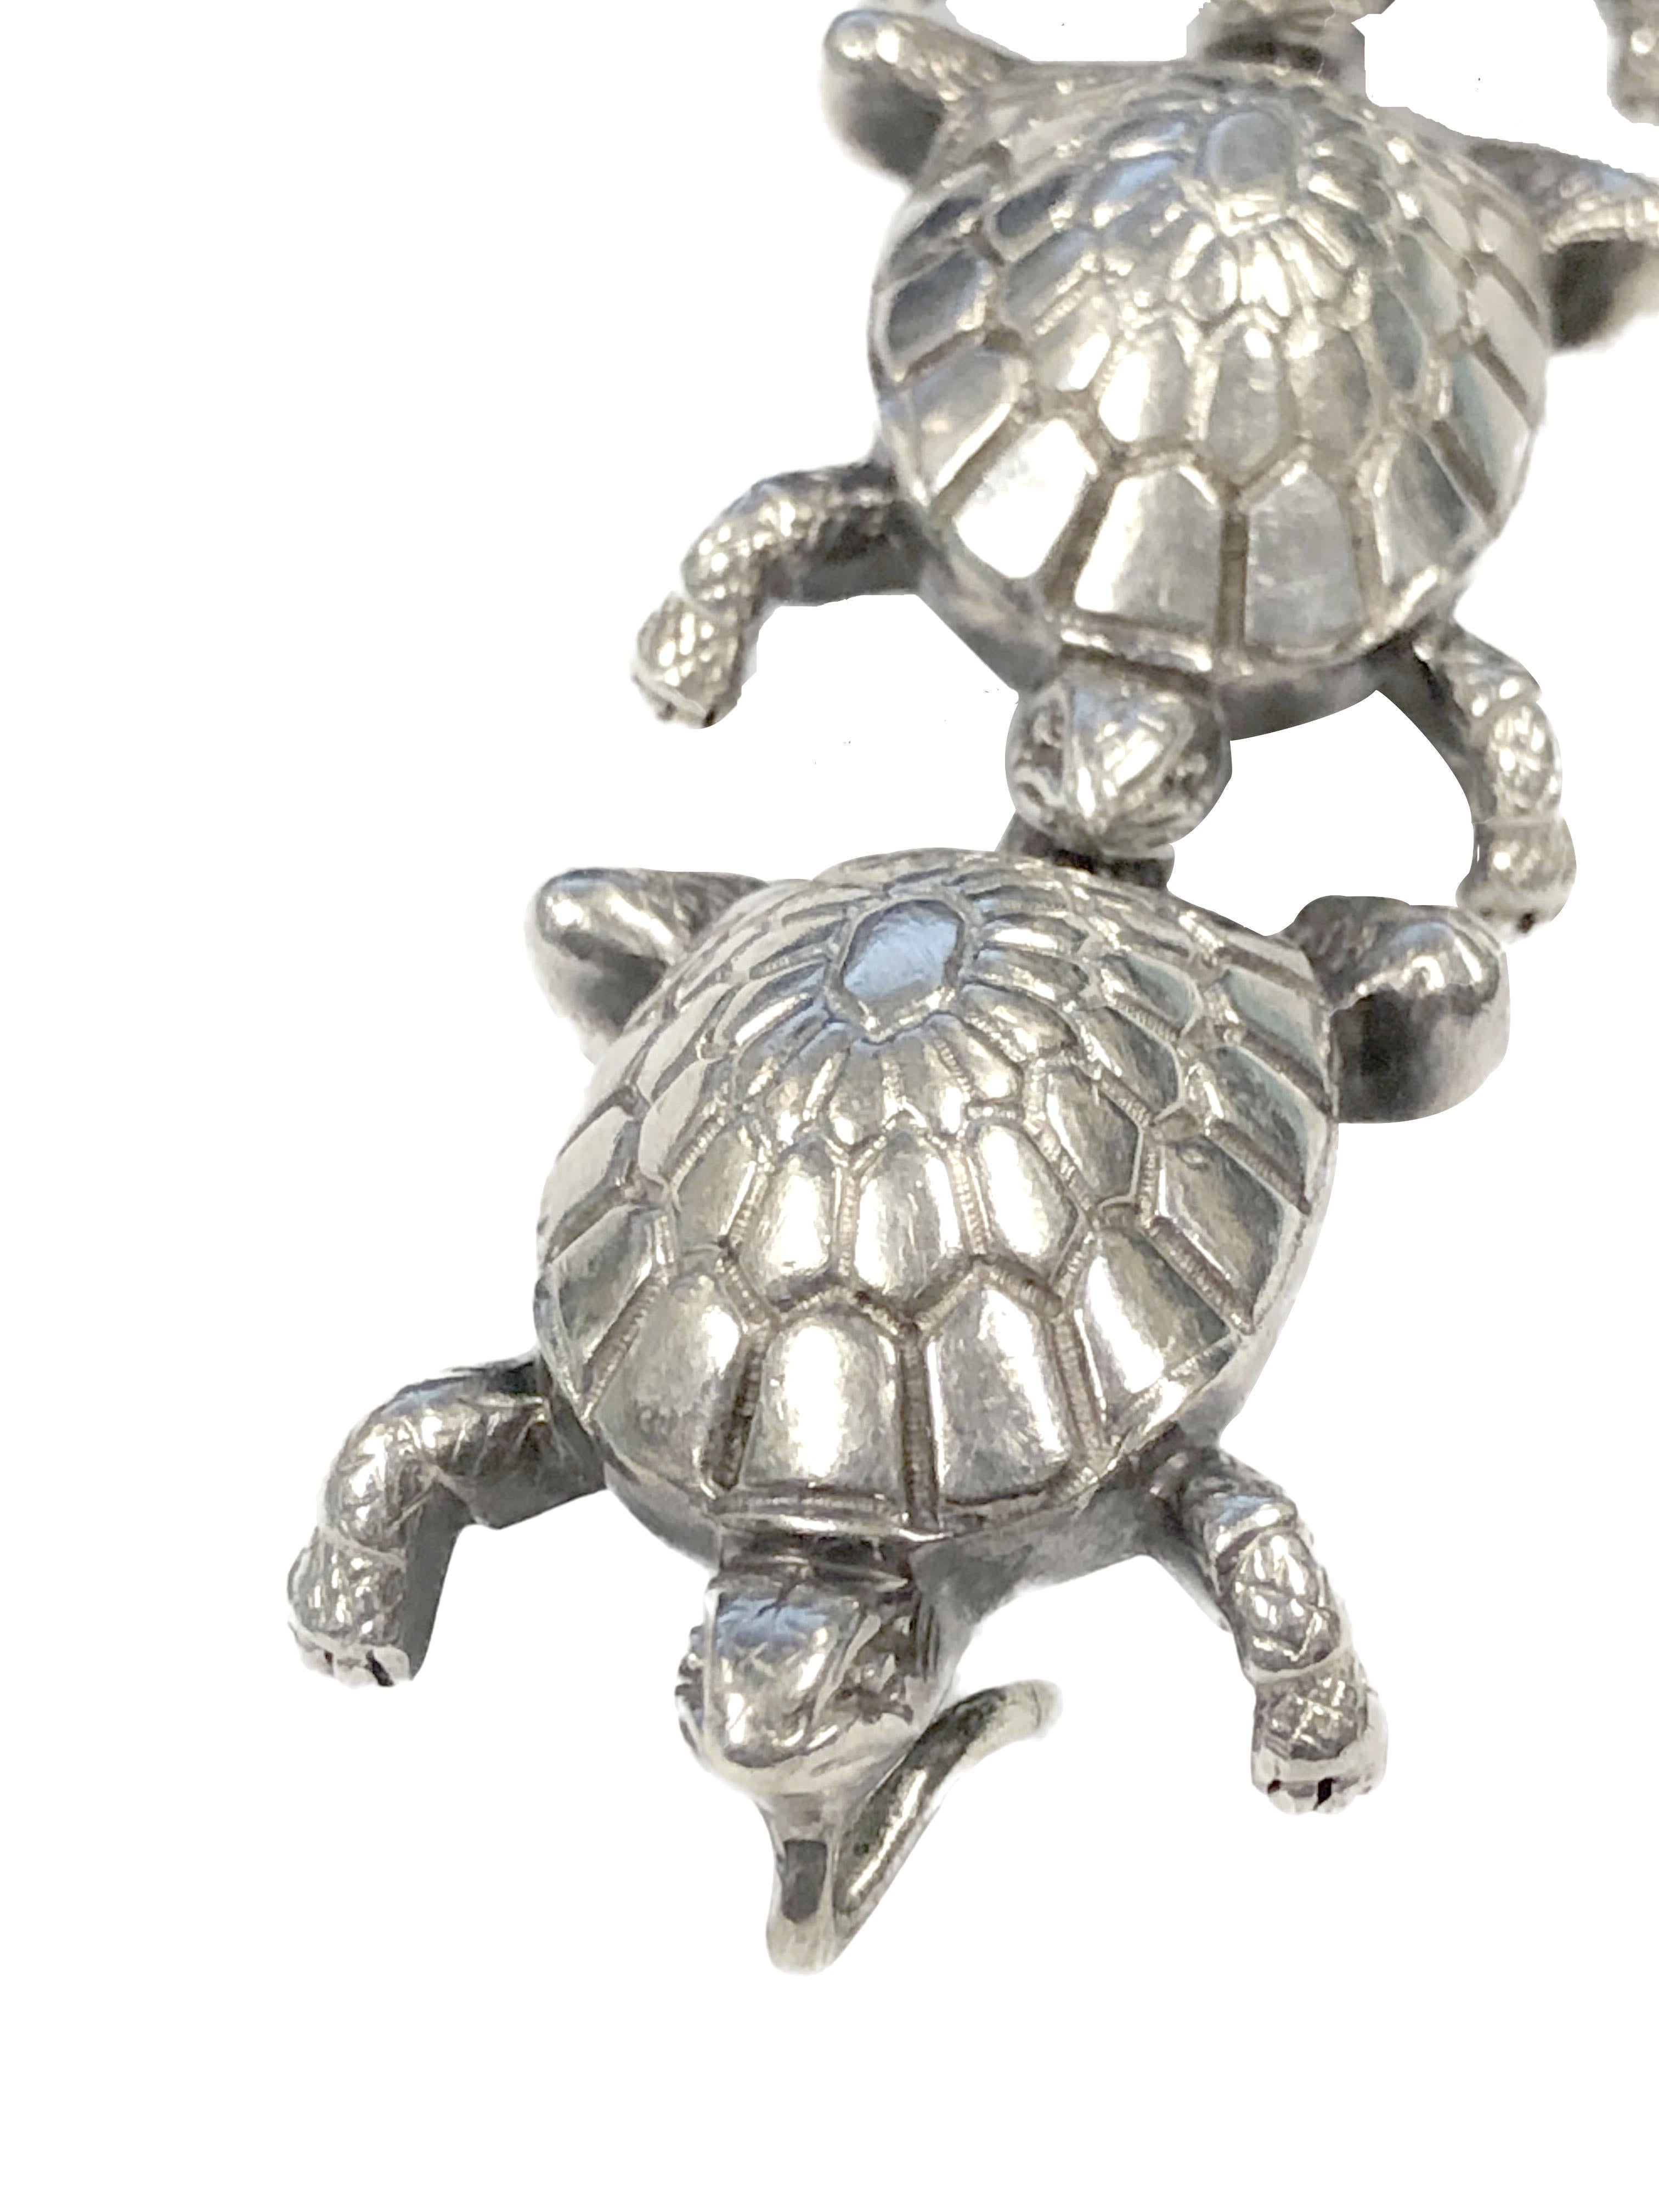 Circa 1990 Tiffany & Company Sterling Silver Turtles Bracelet, measuring 7 inches in length and 1 inch wide, individually joined Turtles for flexibility and very well detailed, nice solid construction and weighing just under 3 ounces. Comes in